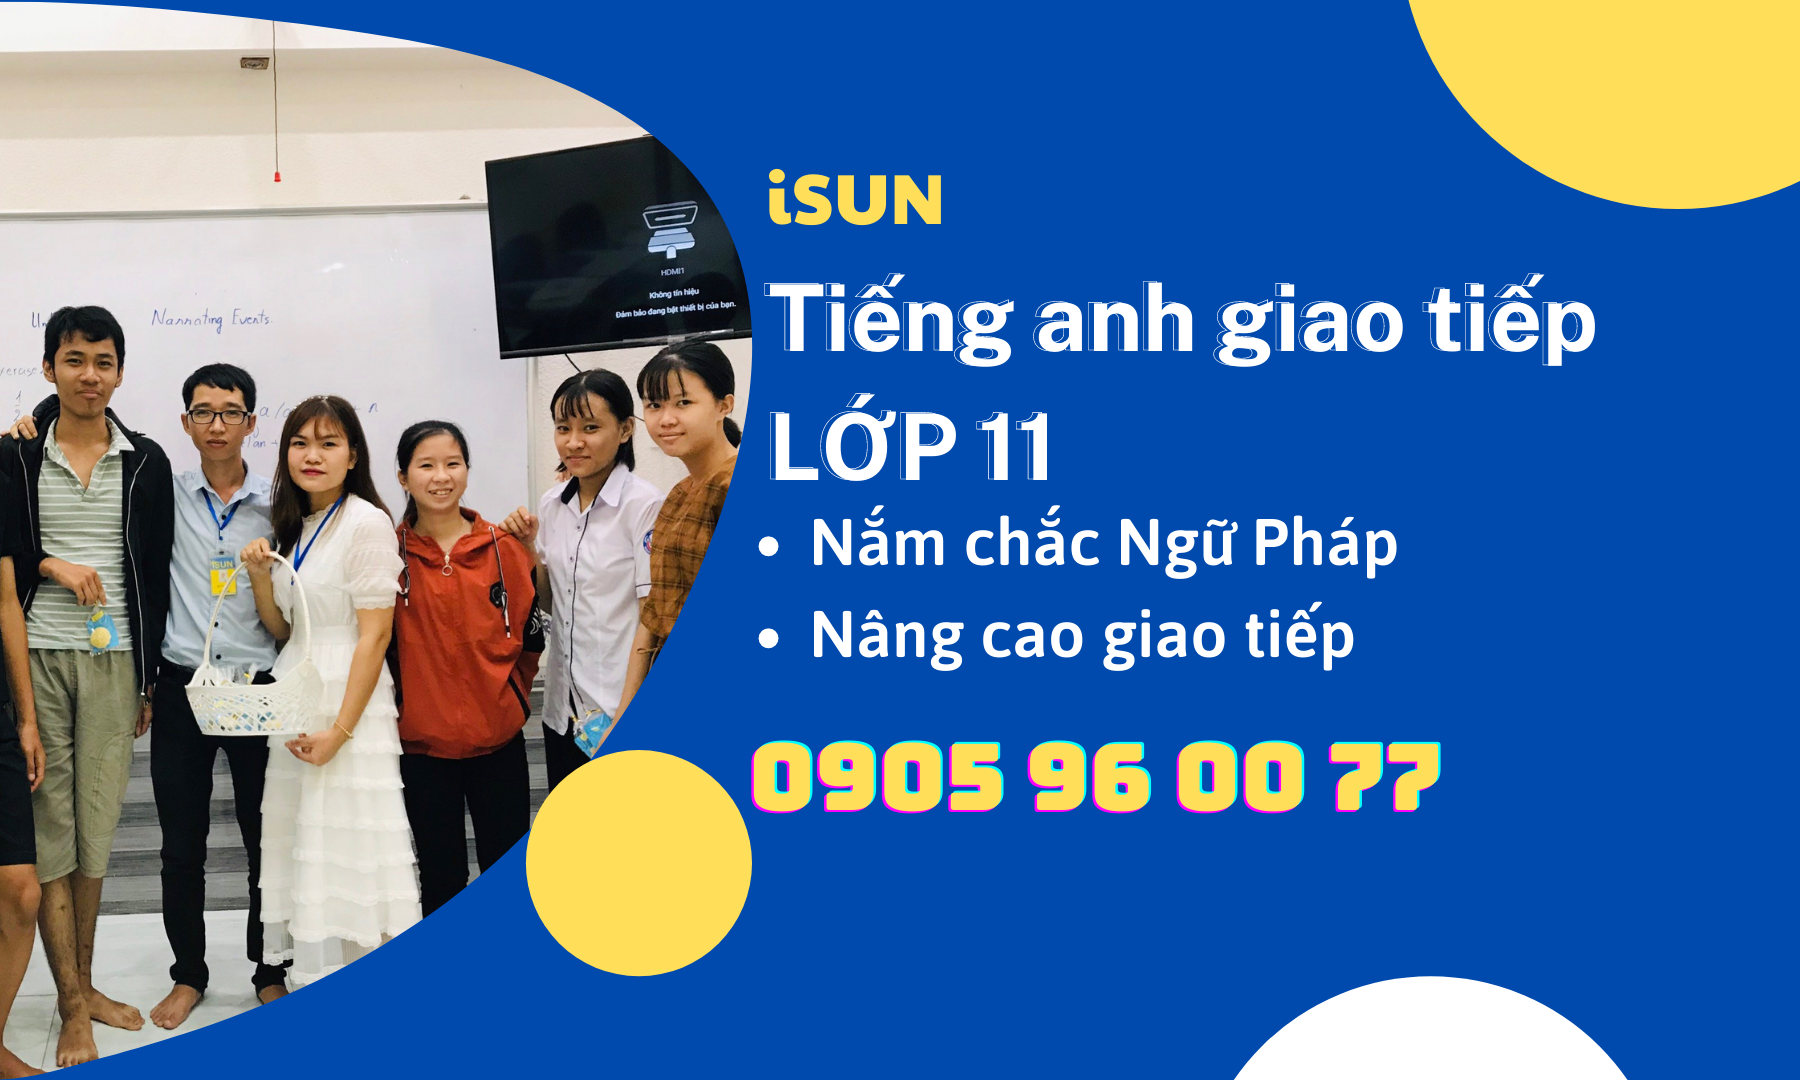 Tiếng anh giao tiếp Lớp 11